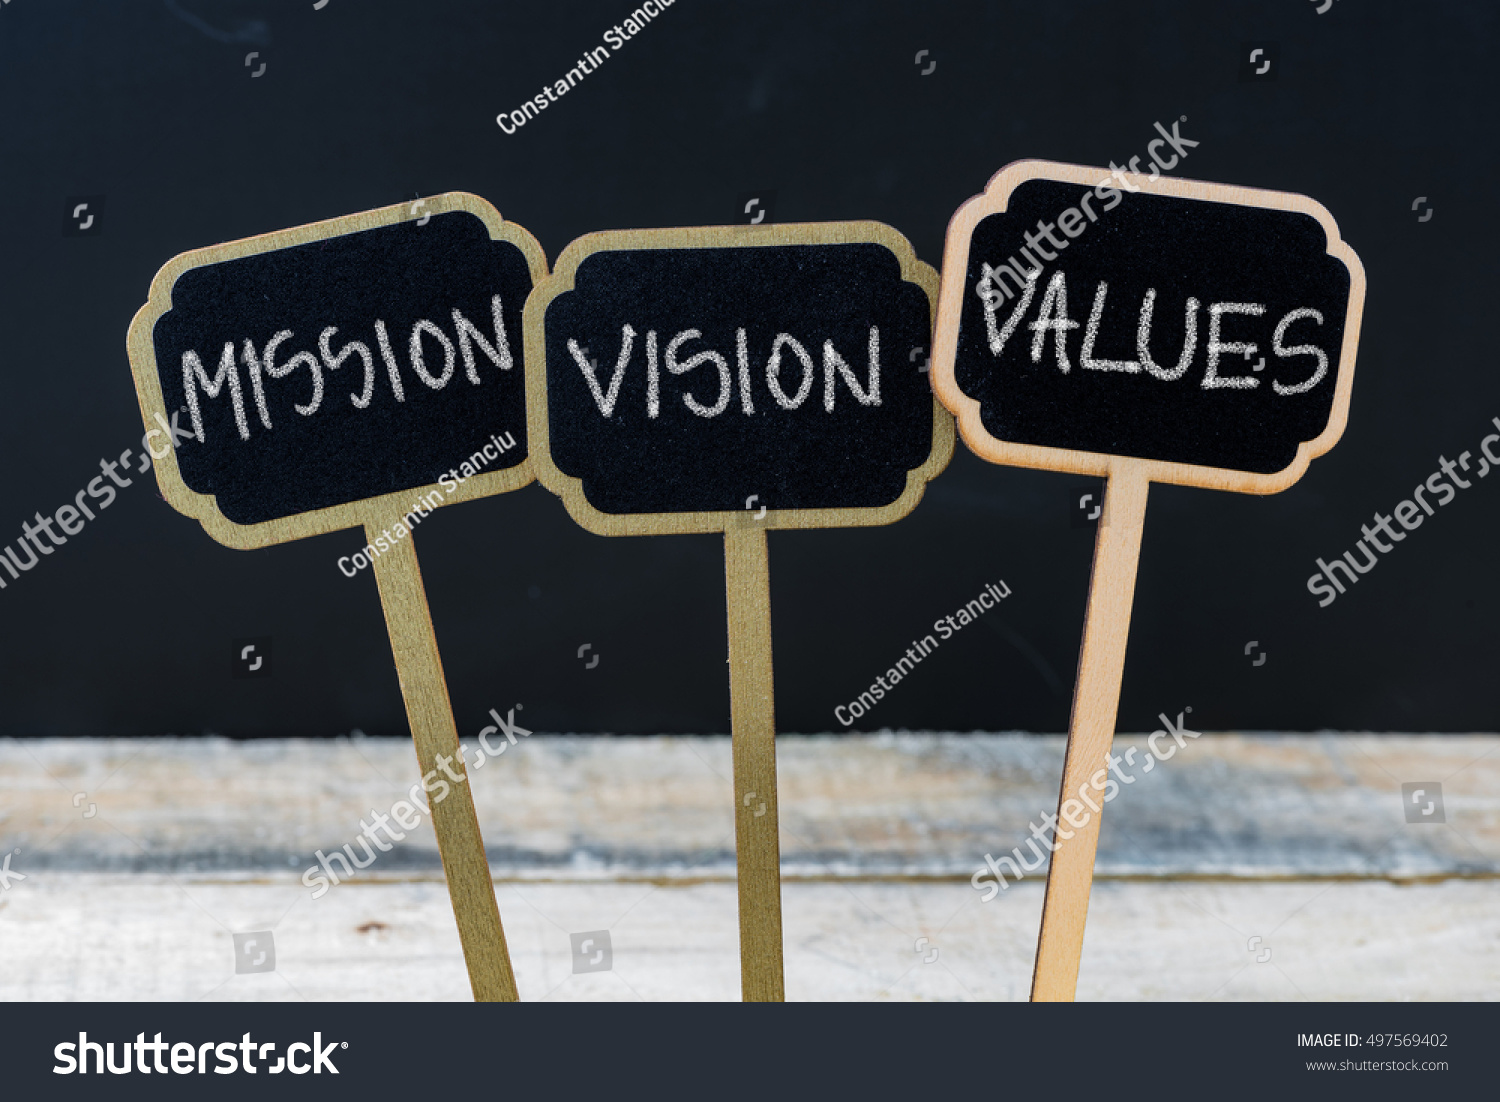 Business message MISSION, VISION, VALUES written with chalk on wooden mini blackboard labels, defocused chalkboard and wood table in background #497569402